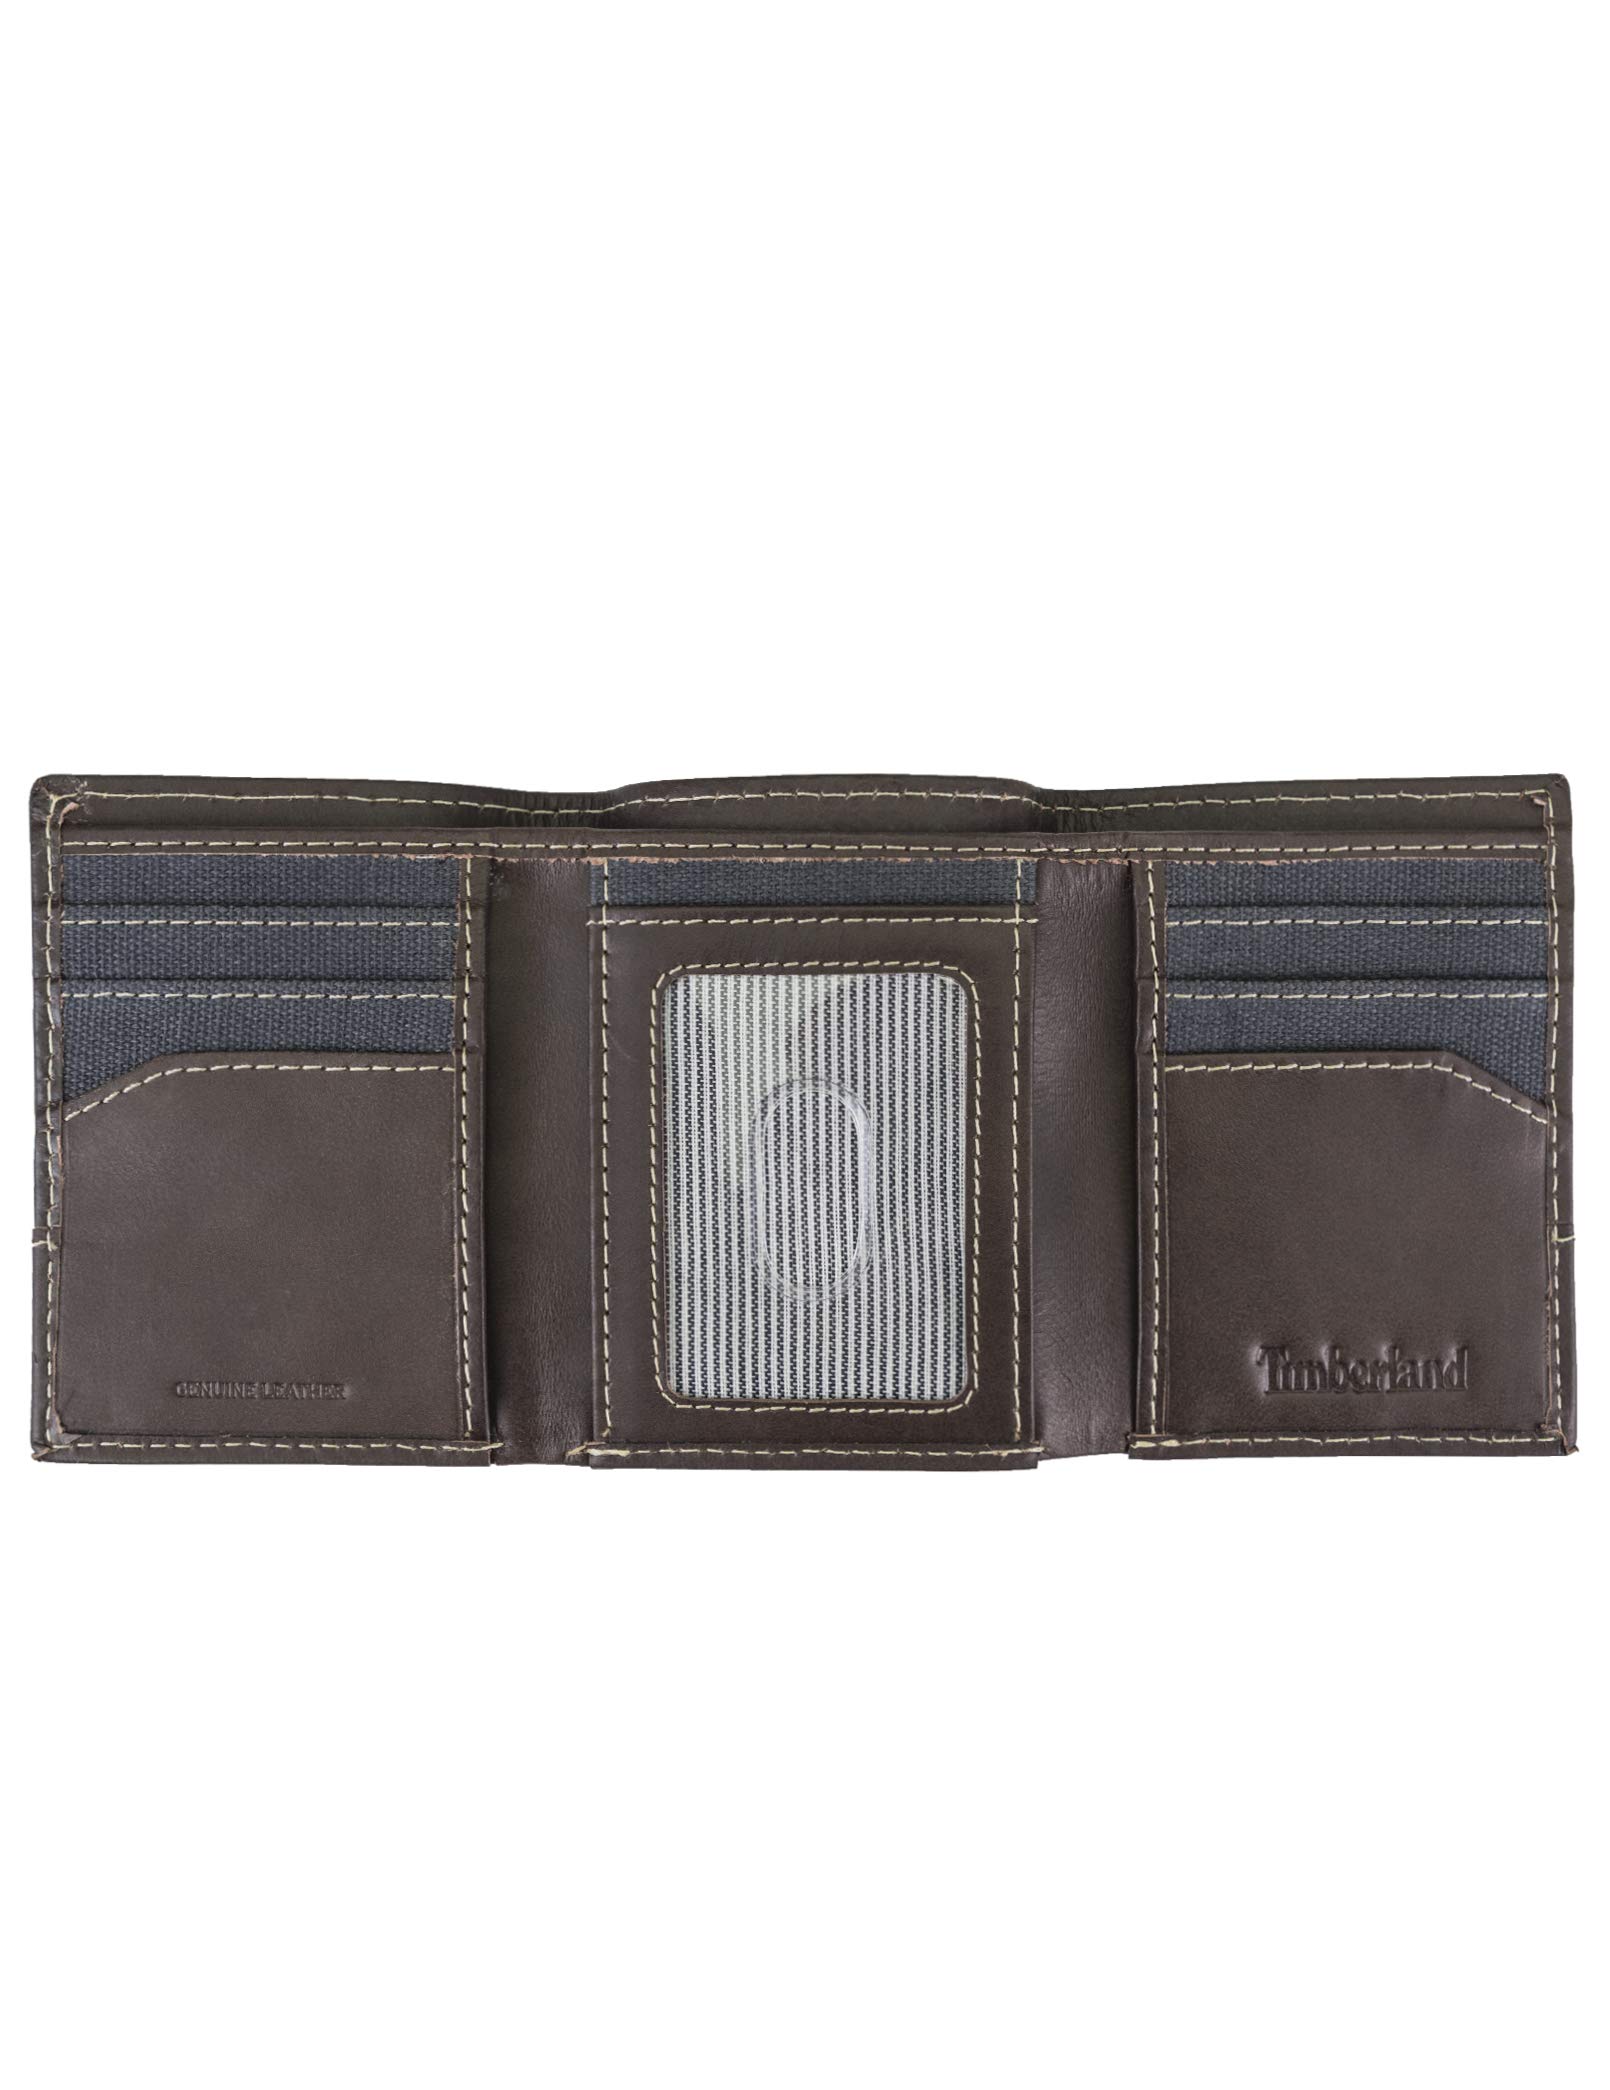 Timberland Men's Canvas & Leather Trifold Wallet